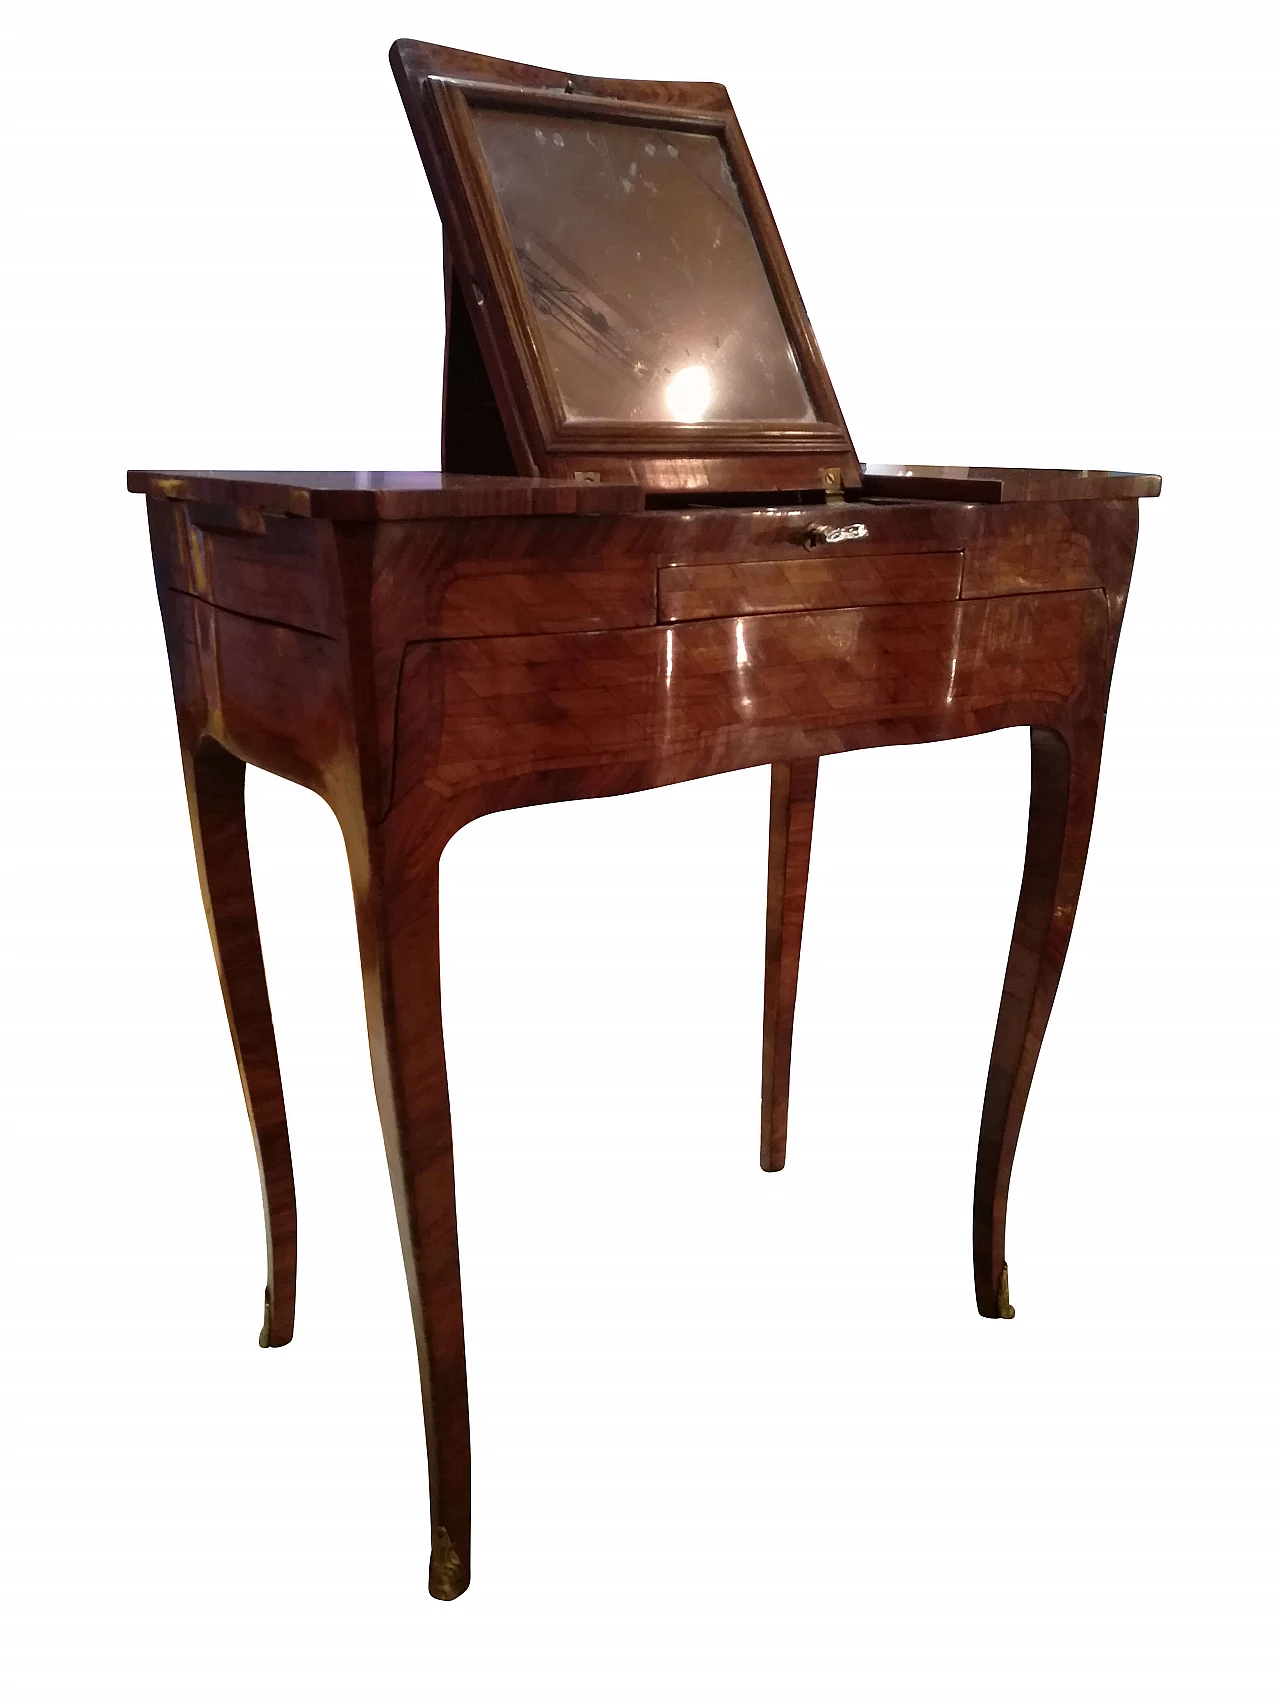 Genoese dressing table in rosewood and snake wood, 18th century 1274531